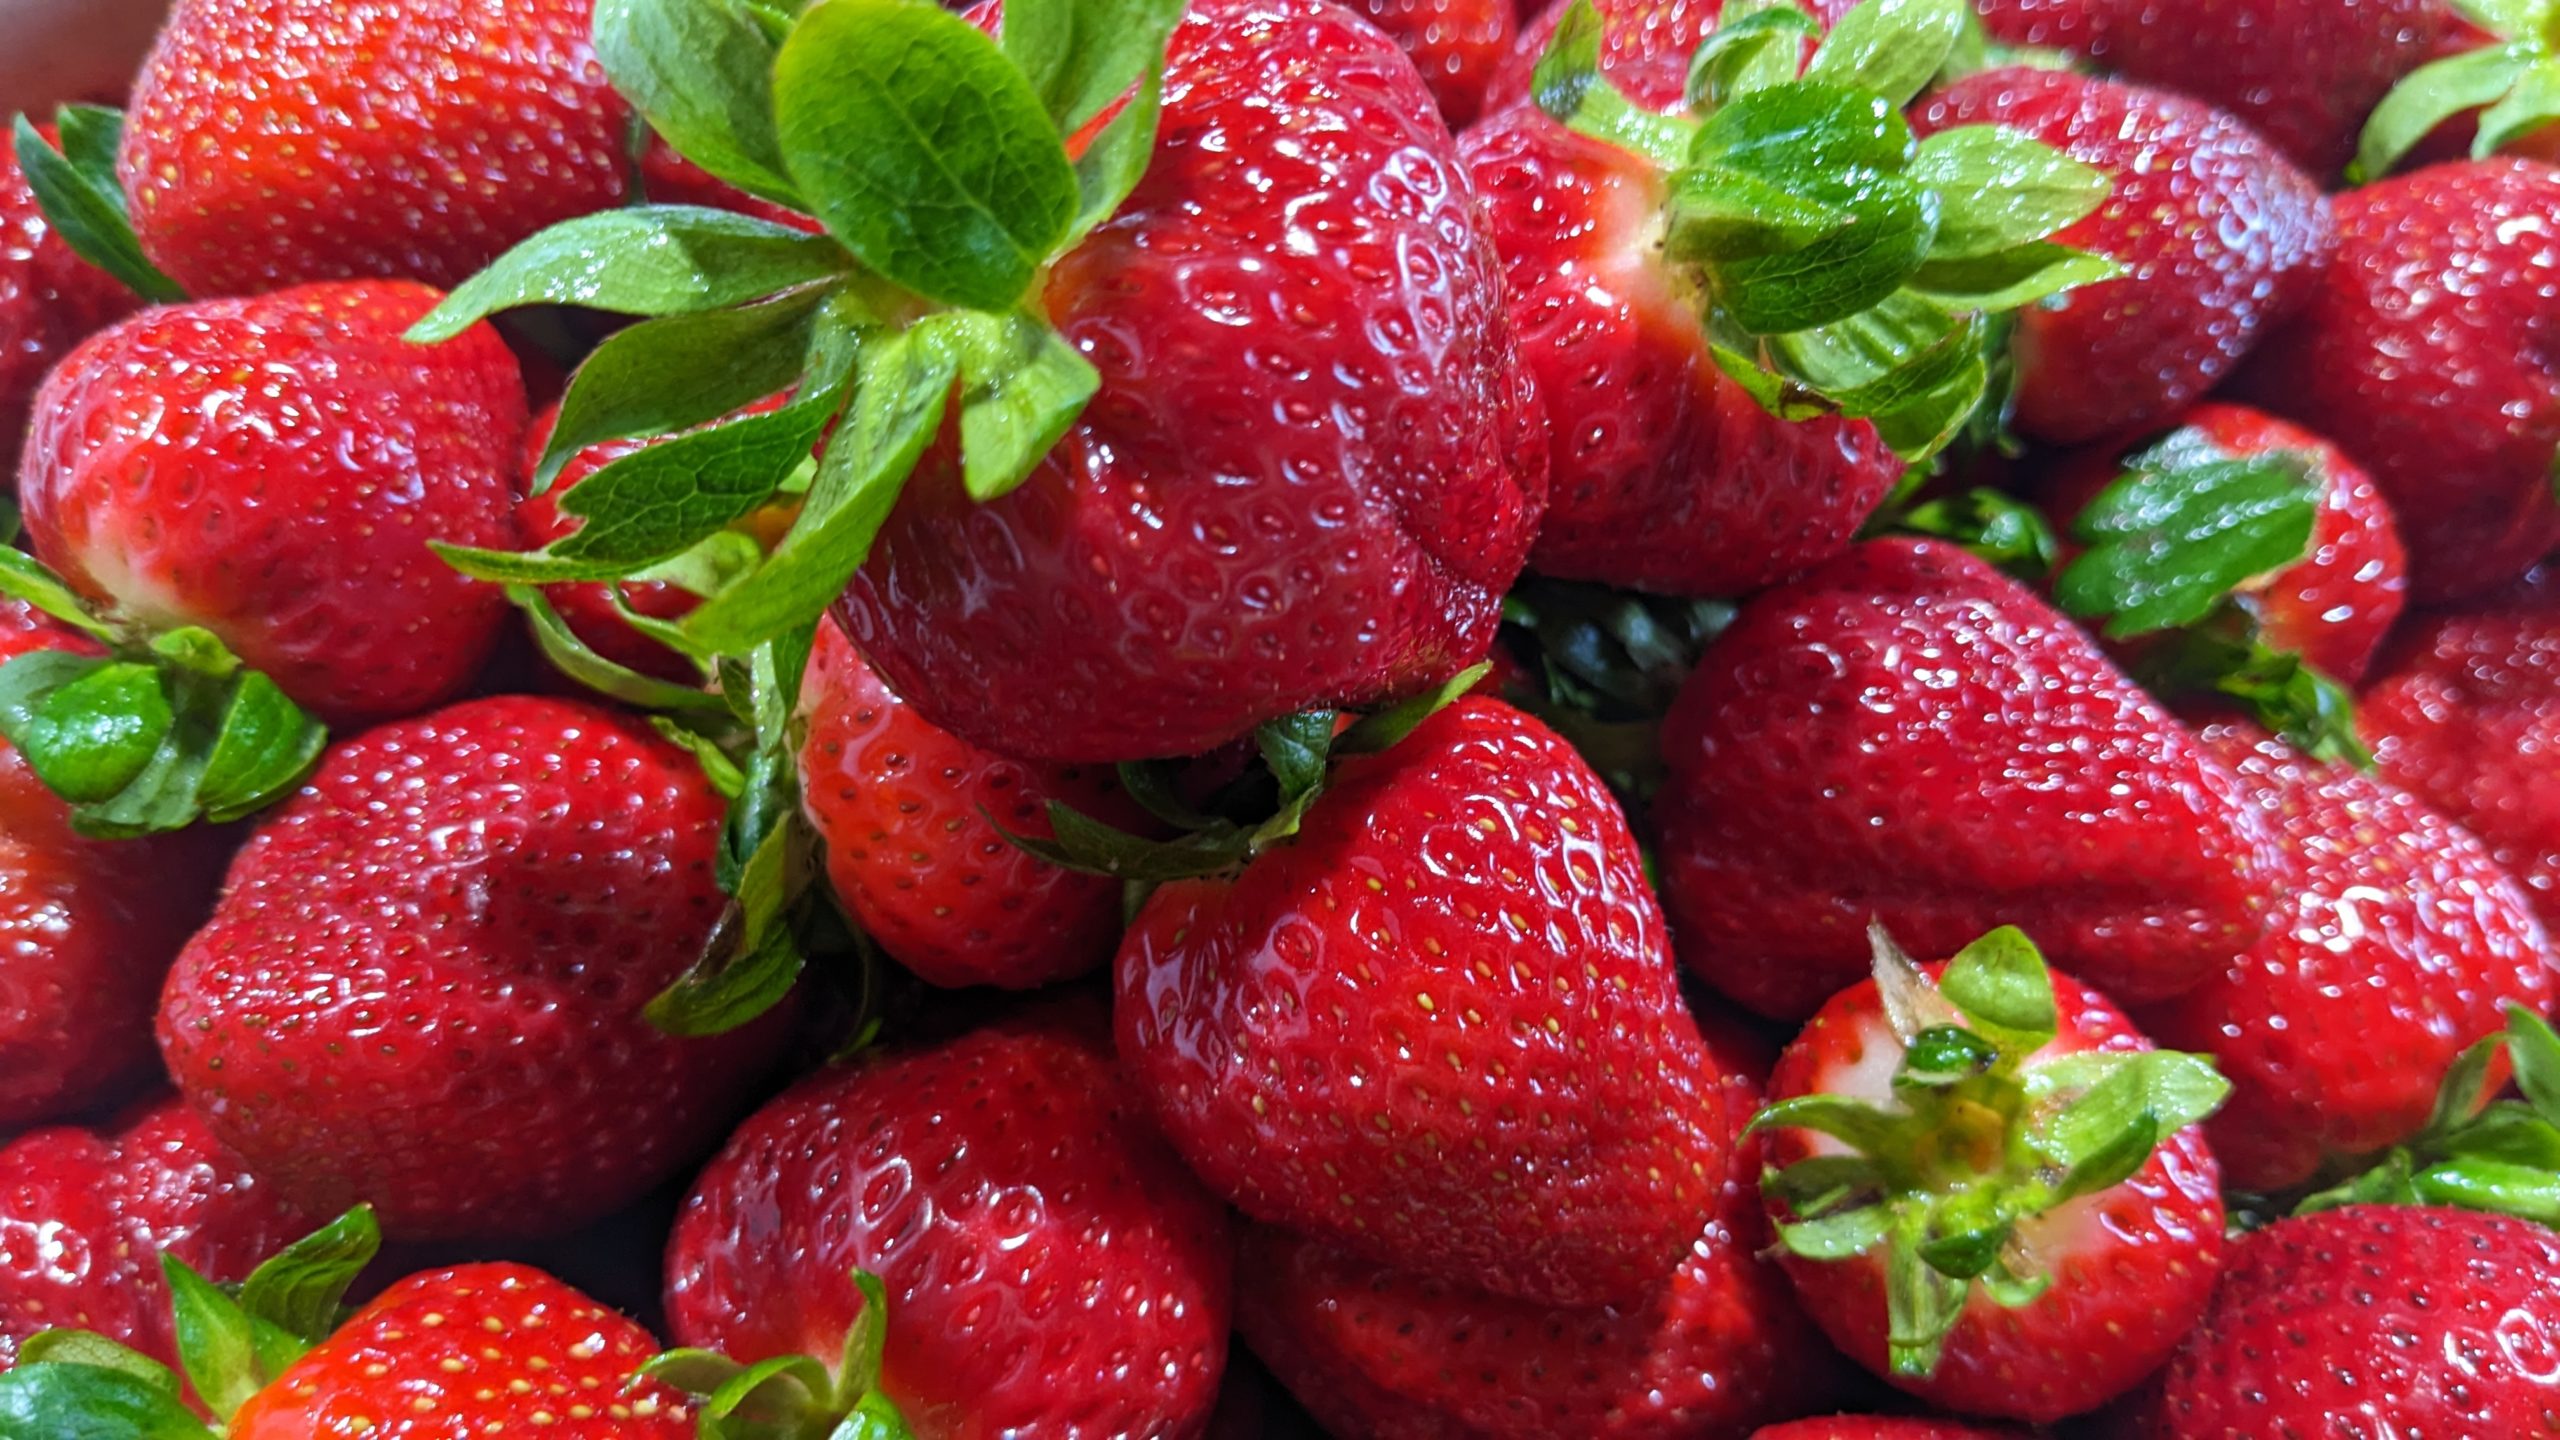 Beyond the Berries: 5 great things to do in Cabot over Strawberry Fest weekend